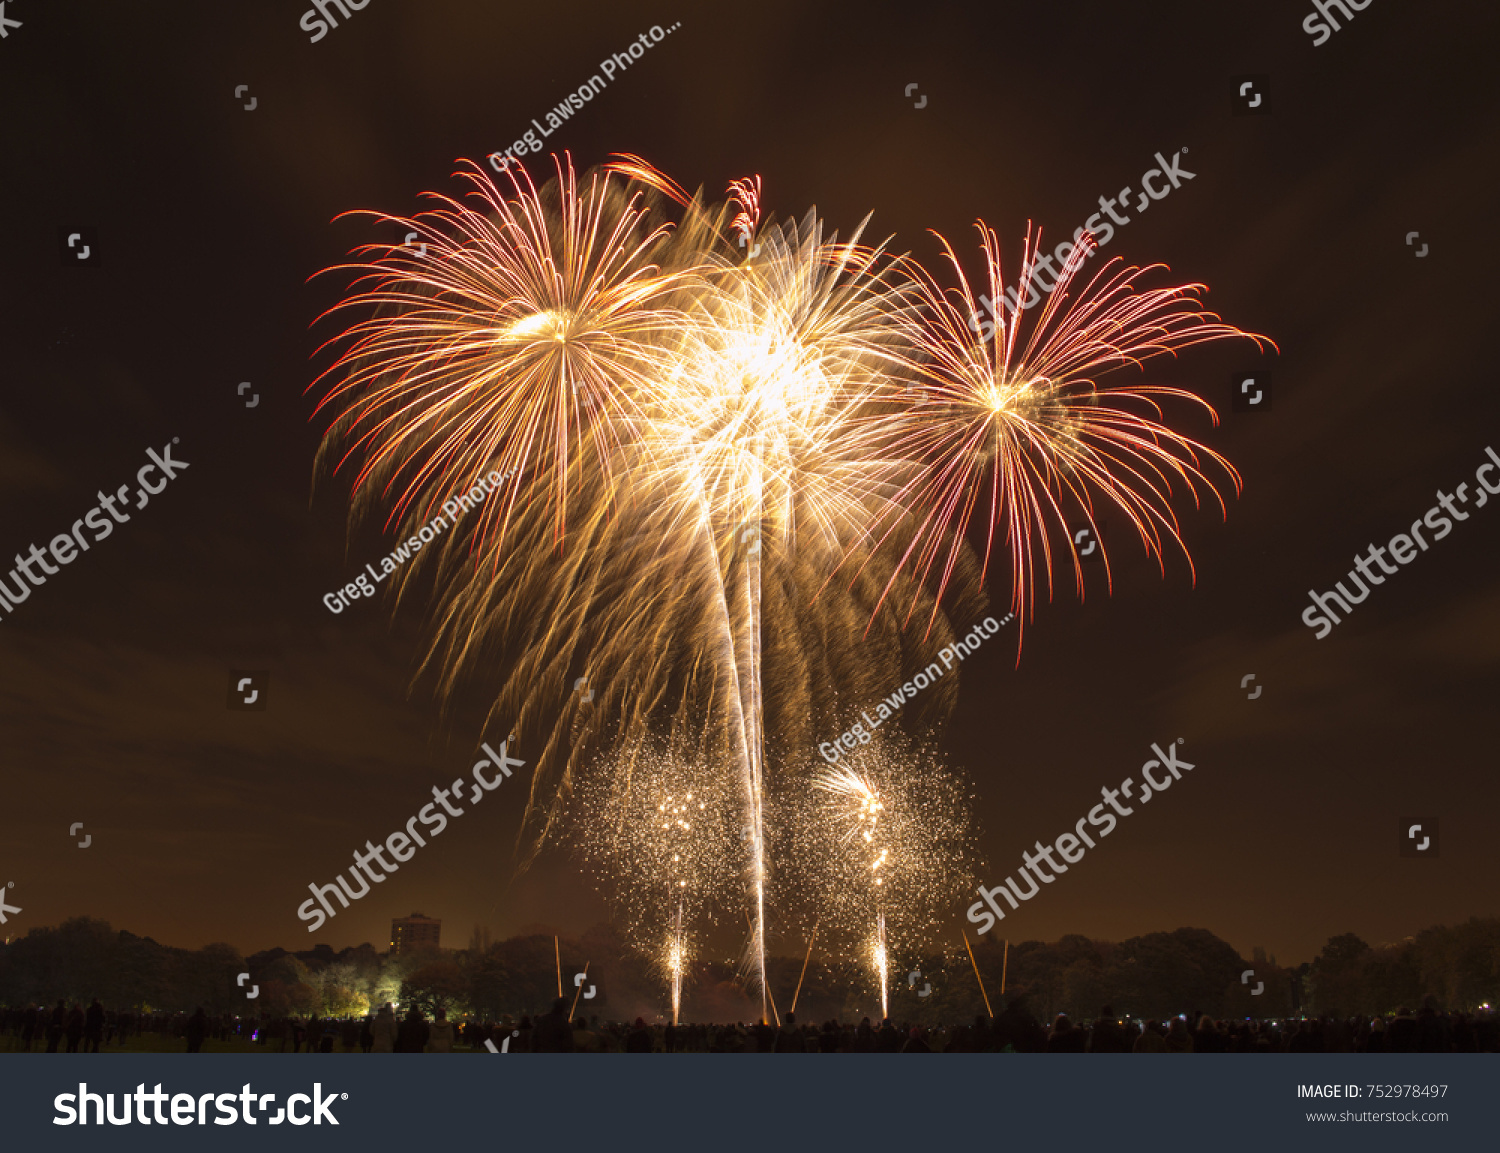 Bonfire night celebrations with a fireworks show at Sefton Park, Liverpool, UK. On 5th November #752978497